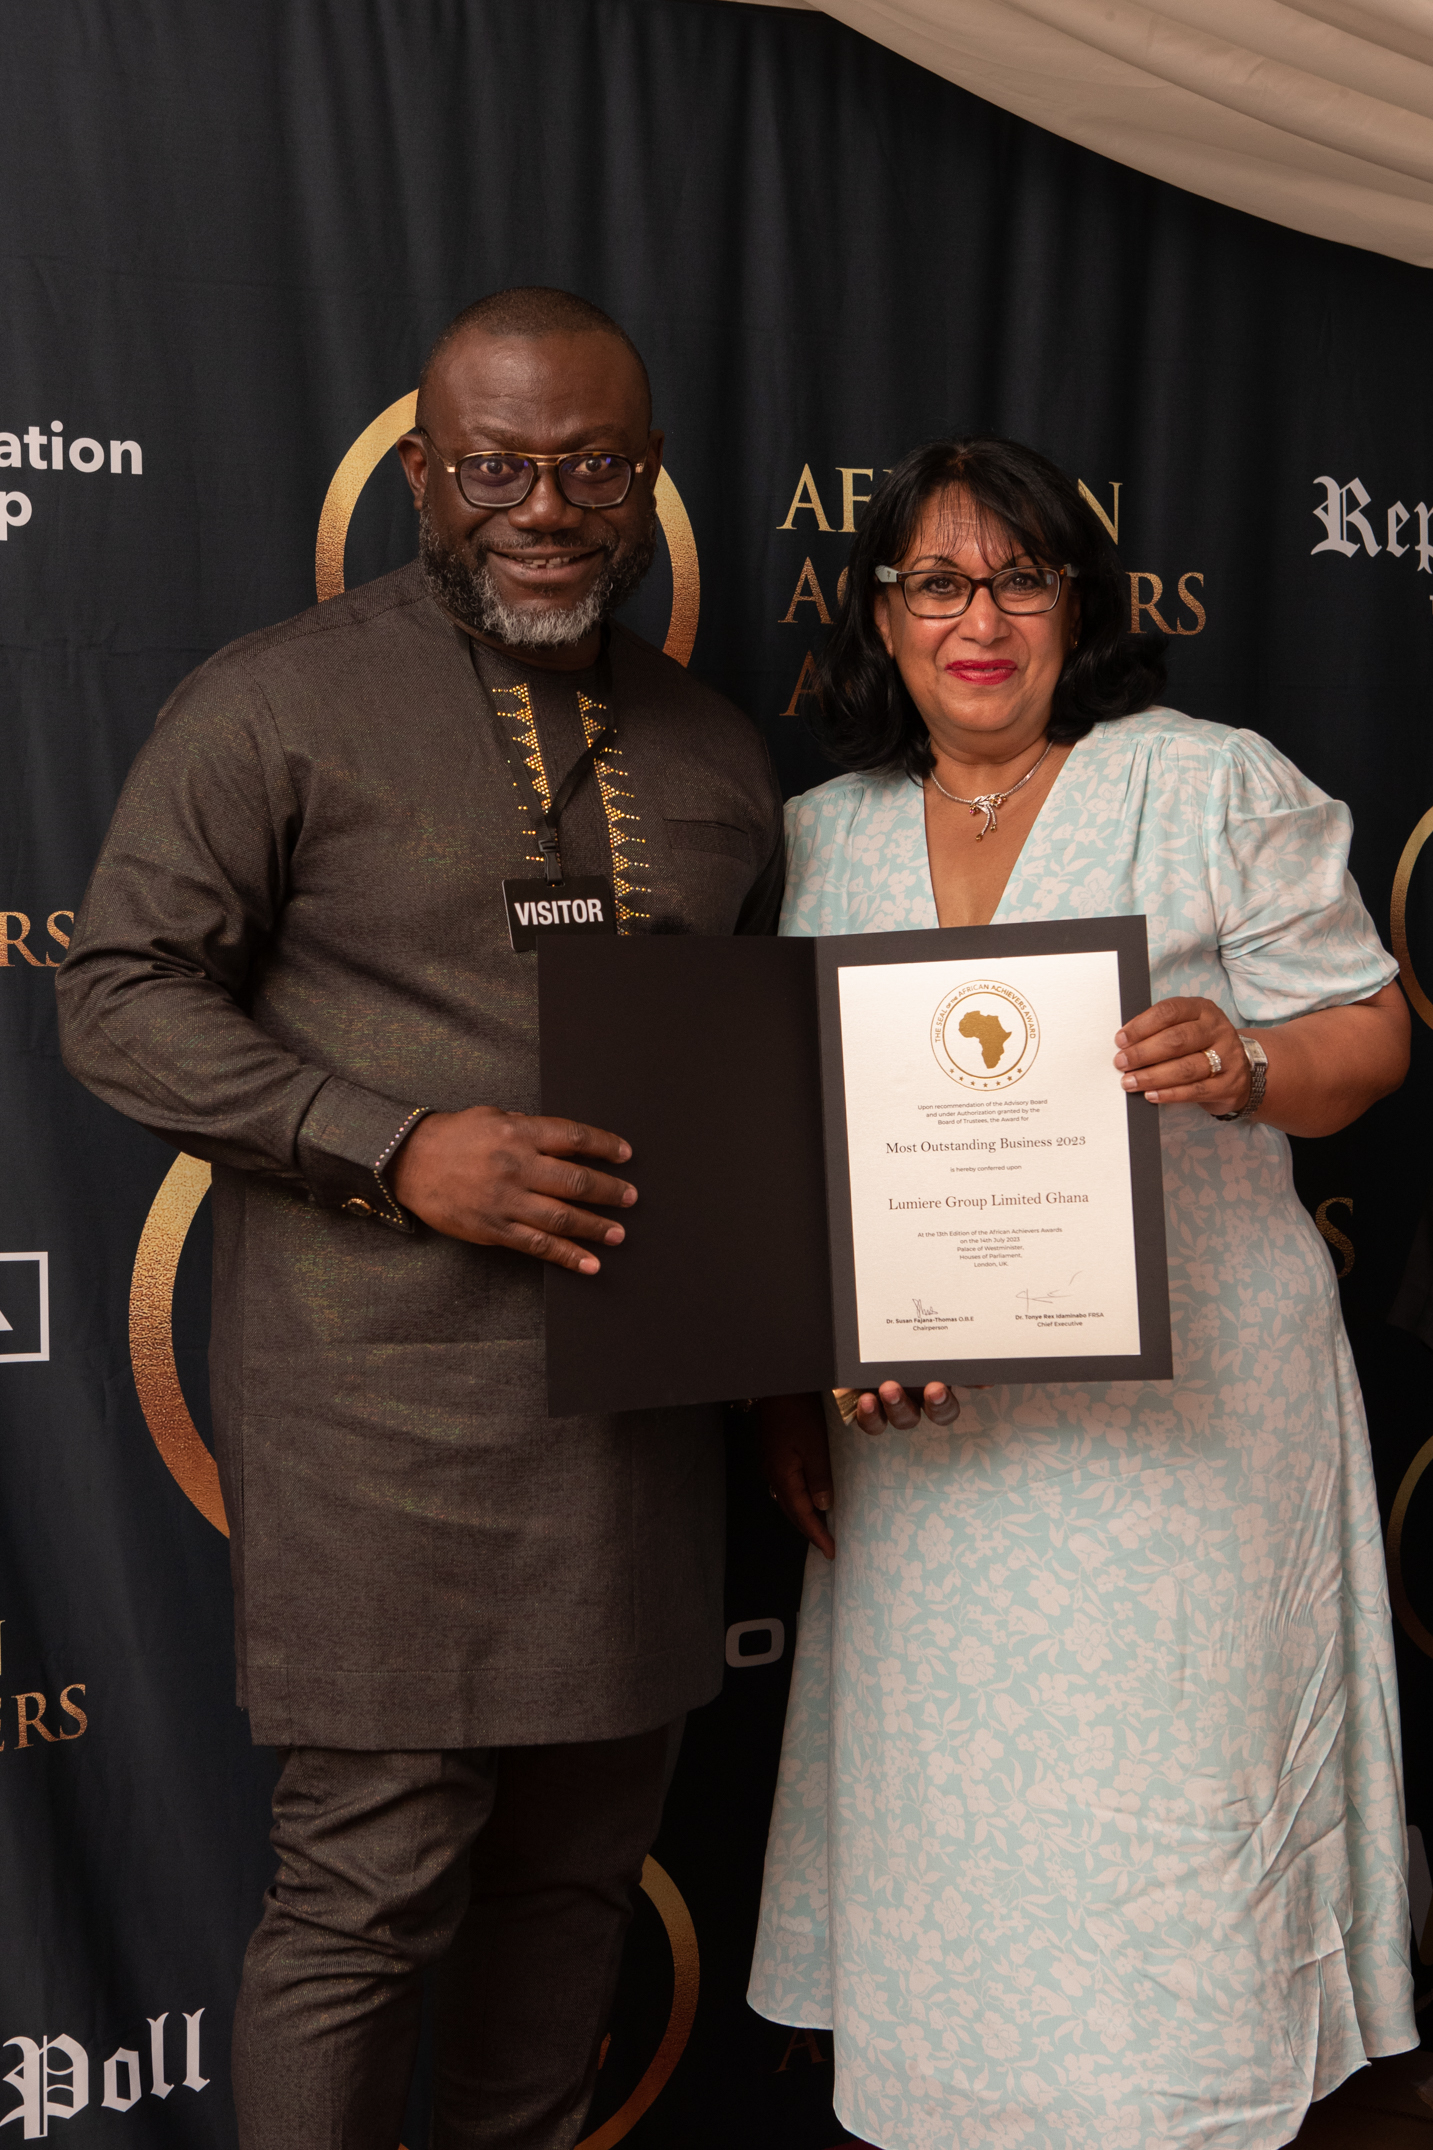 THE AFRICAN ACHIEVERS AWARD 2023Images Lewis Patrick